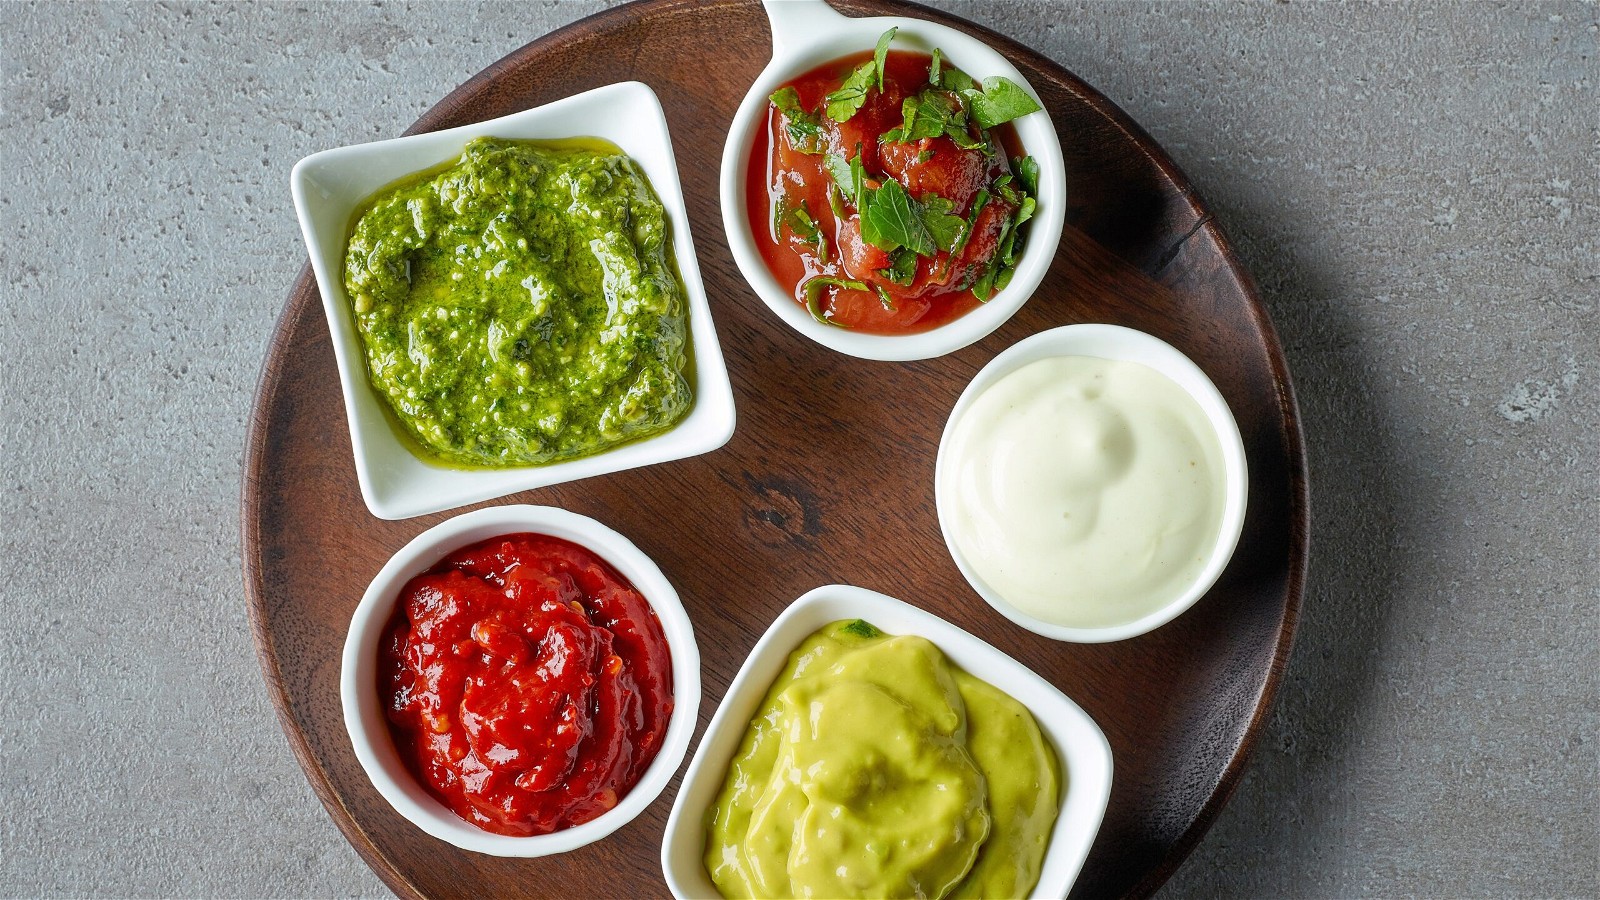 Image of Dip-a-licious Dips made by Tanja